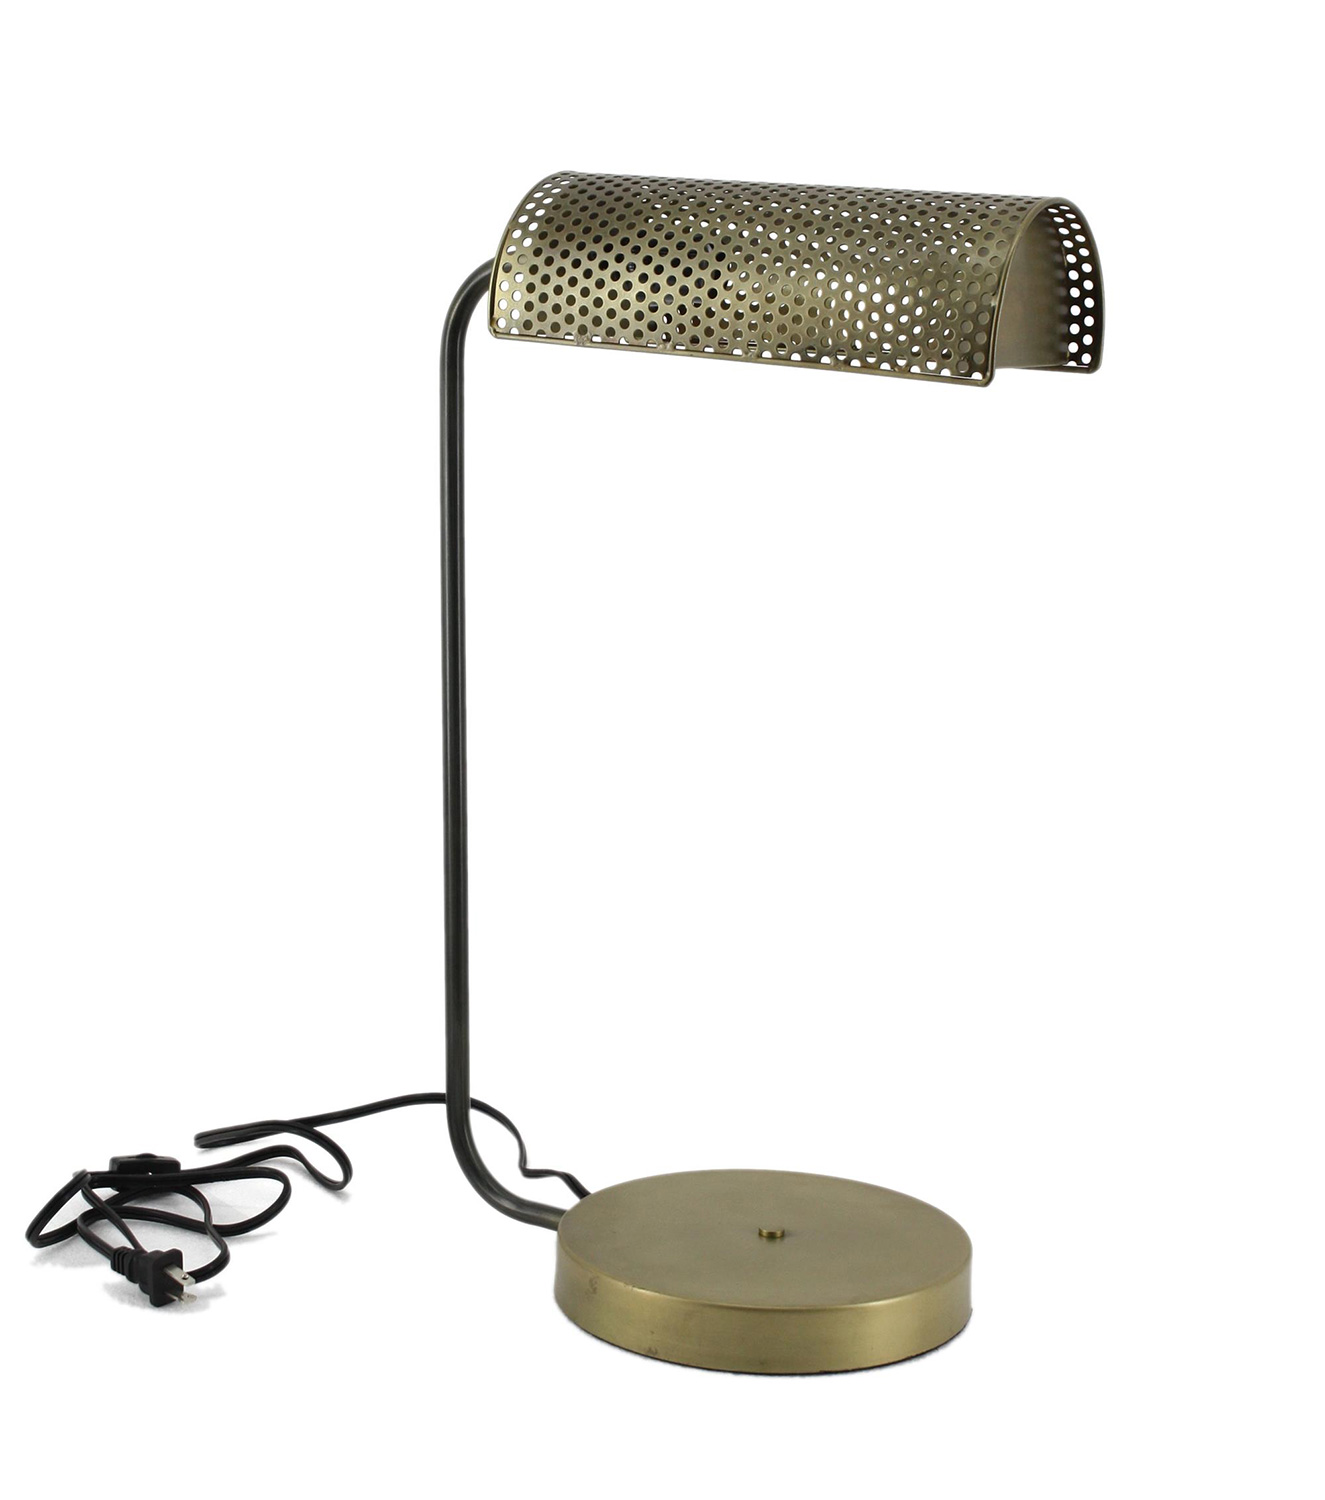 Ren-Wil Abagnale Table Lamp - Antique Brass